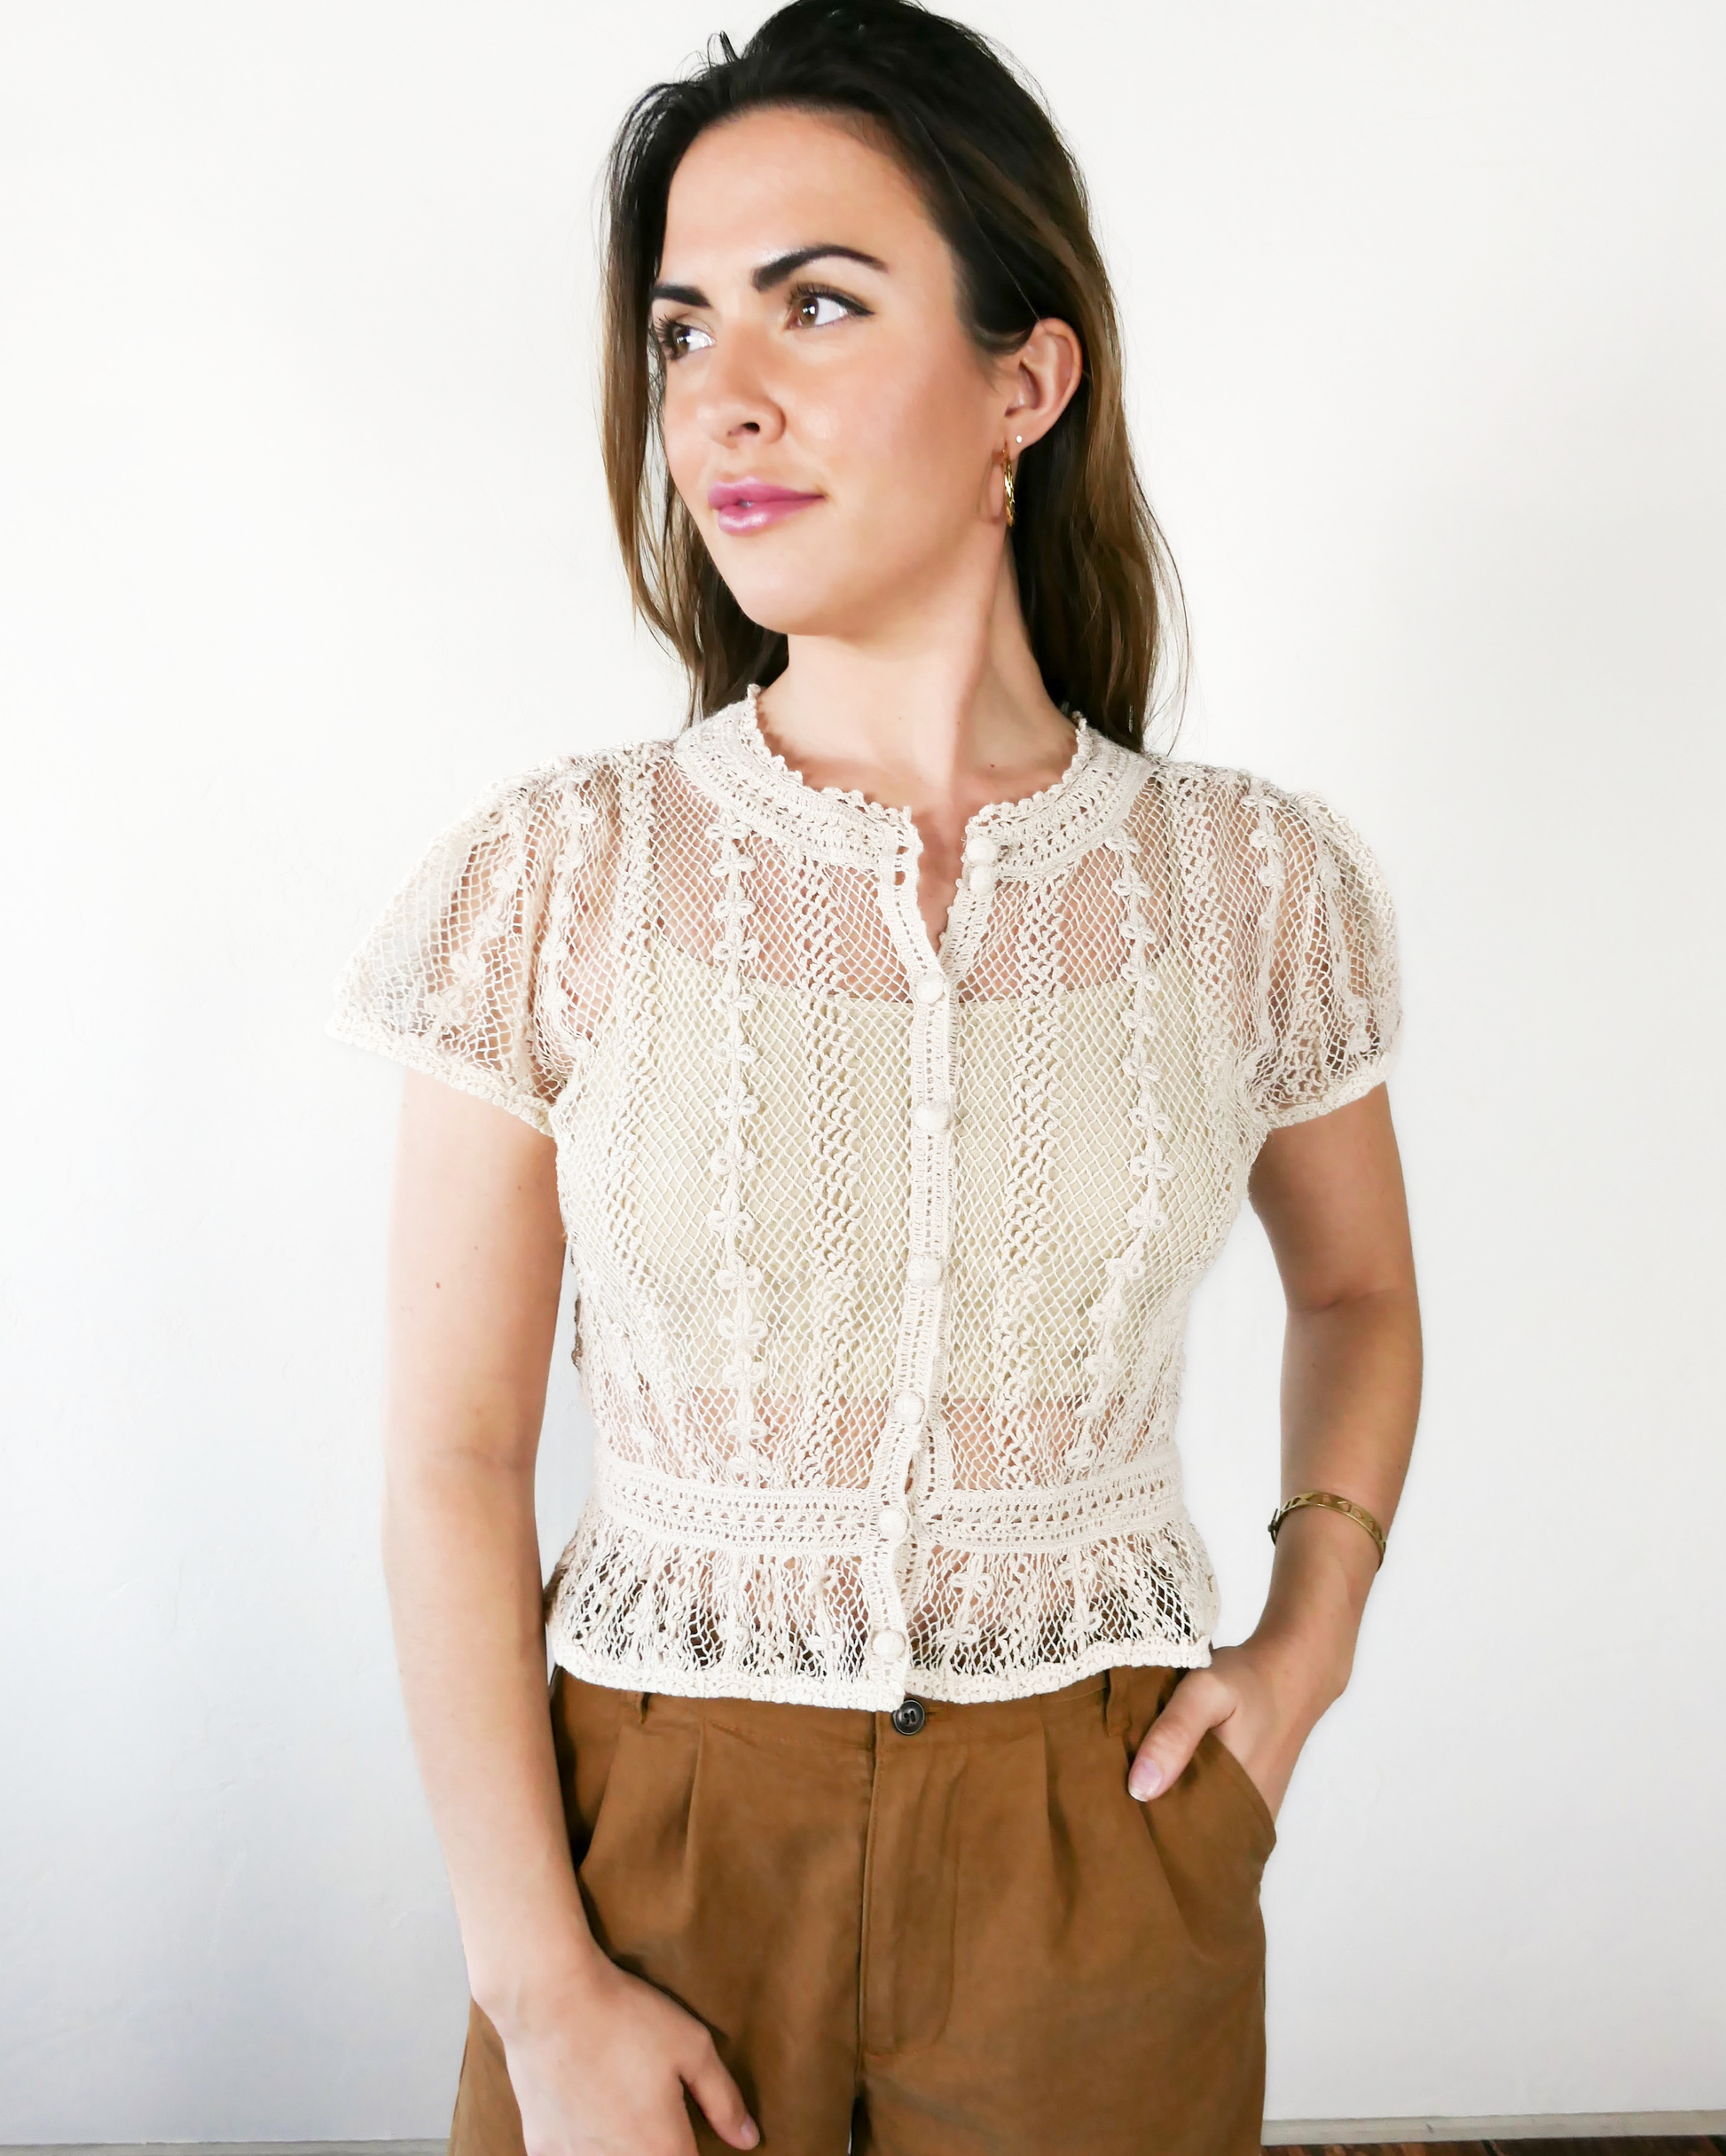 A Lim's original vintage crochet piece from the 1980s, this top was hand crocheted with very fine threads to create a delicate, lightweight, and transparent feel. Puffed sleeves, a high waist, and flared hem lend the top a whimsical yet tailored look. The top is reversible and can be buttoned up the front or back. Natural color.